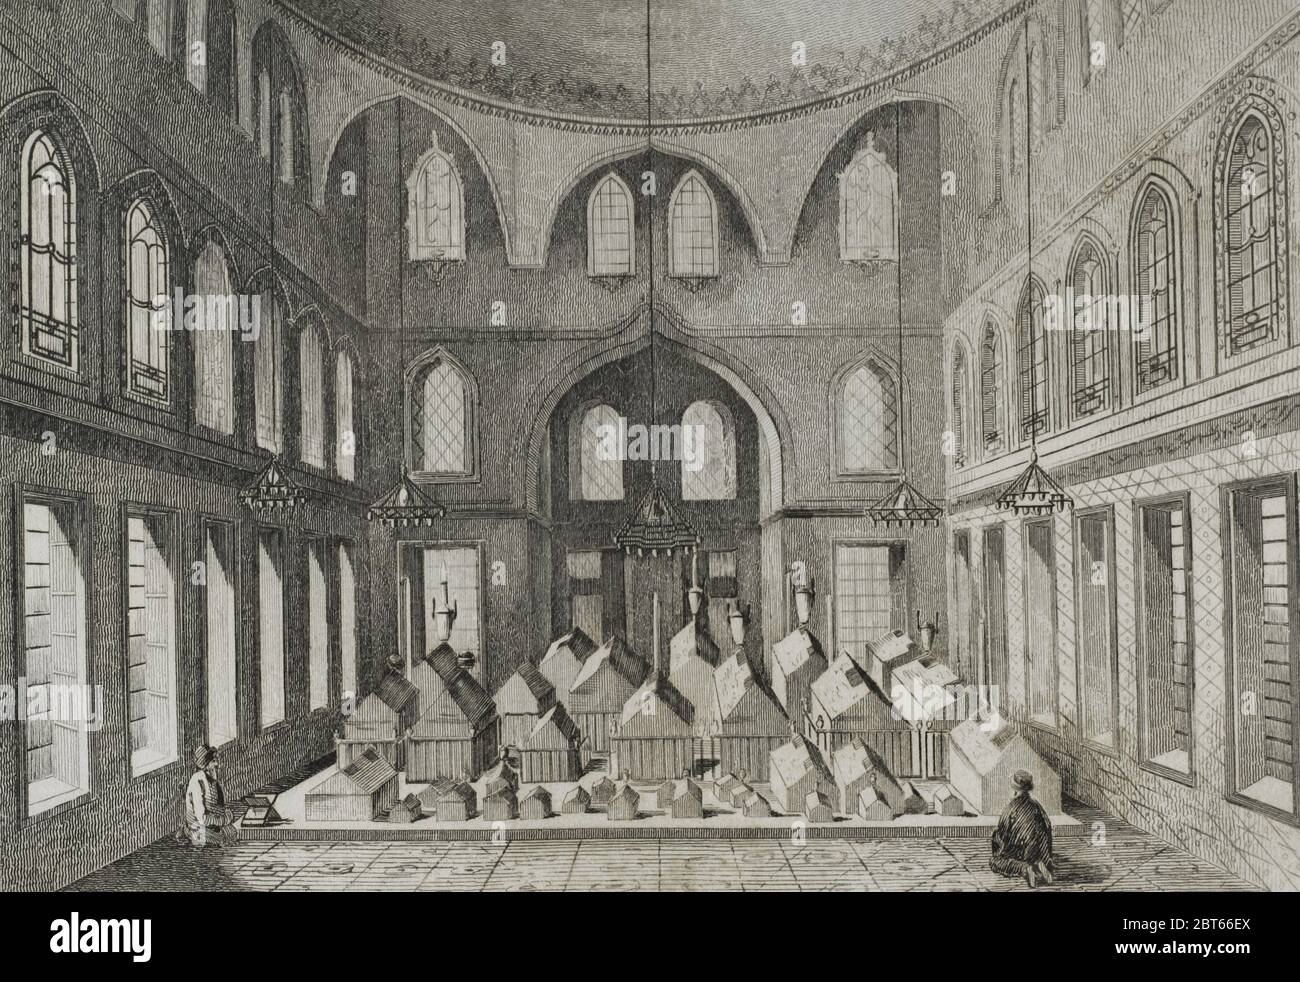 Ottoman Empire. Turkey. Constantinople (today Istanbul). Tomb of Turhan Hatice Valide Sultan (1627-1683). Haseki Sultan of the Ottoman Sultan Ibrahim (reign 1640-1648), and Valide Sultan as mother of Mehmed IV. Engraving by Lemaitre, Dumouxa and Traversier. Historia de Turquia by Joseph Marie Jouannin (1783-1844) and Jules Van Gaver, 1840. Stock Photo